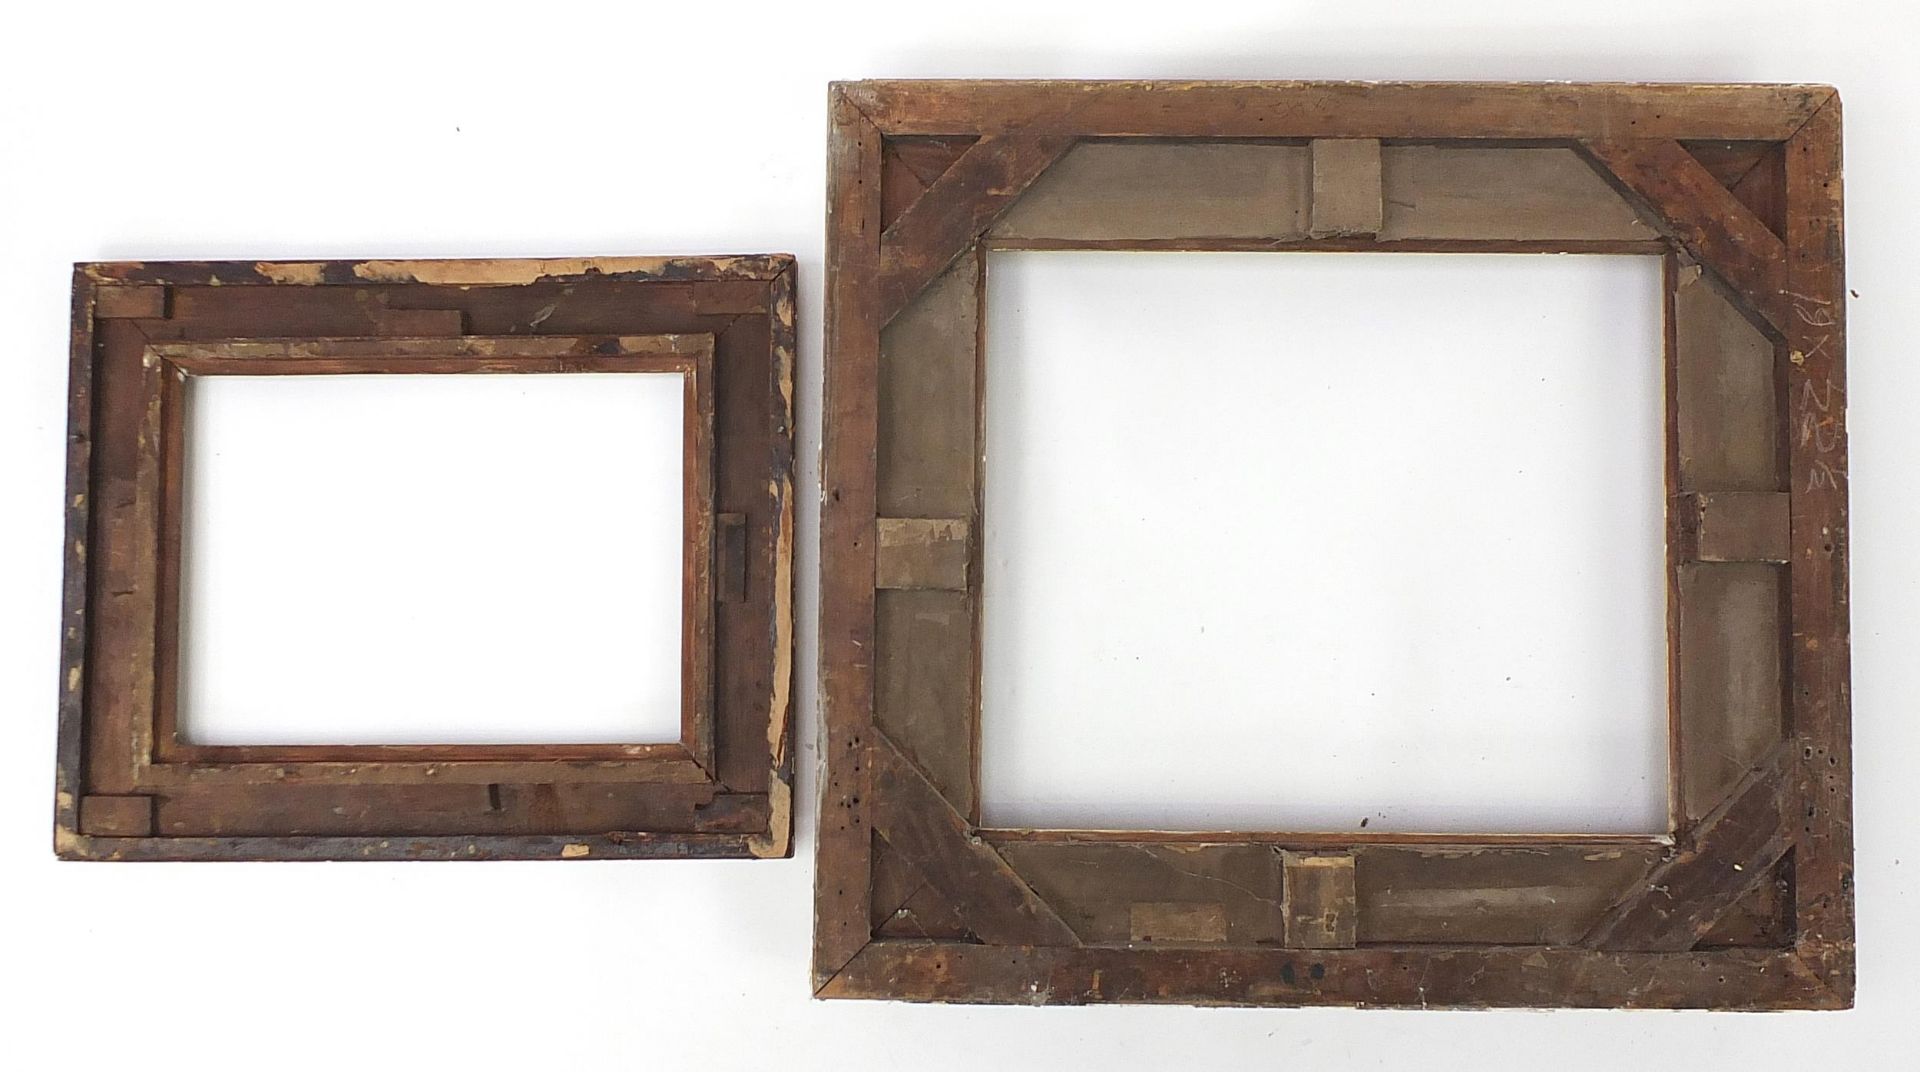 Two 19th century ornate gilt frames, the aperture sizes 56cm x 48cm and 43cm x 31.5cm - Image 4 of 4